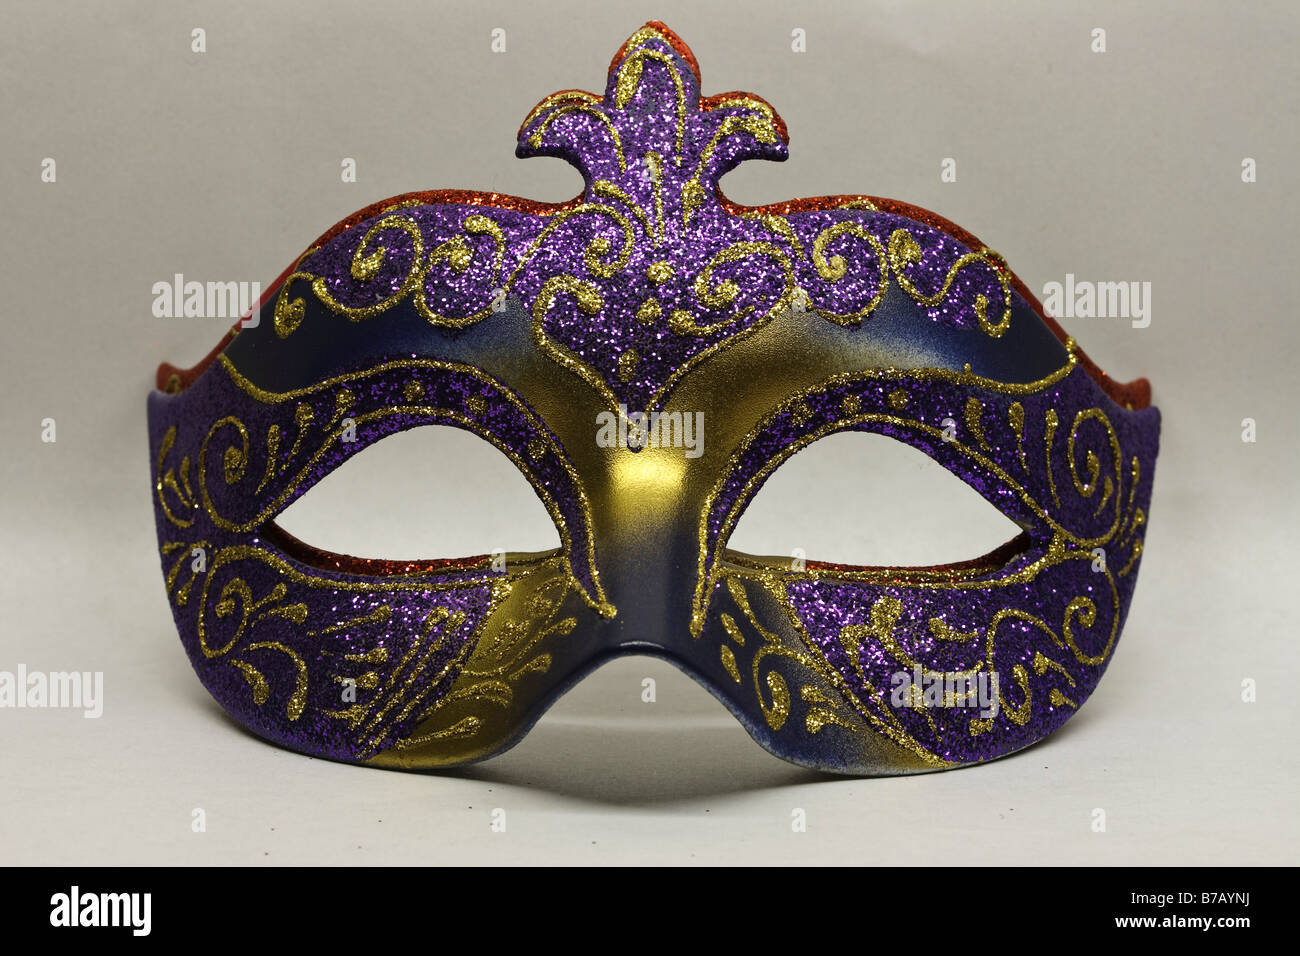 A painted decorative masquerade mask Stock Photo